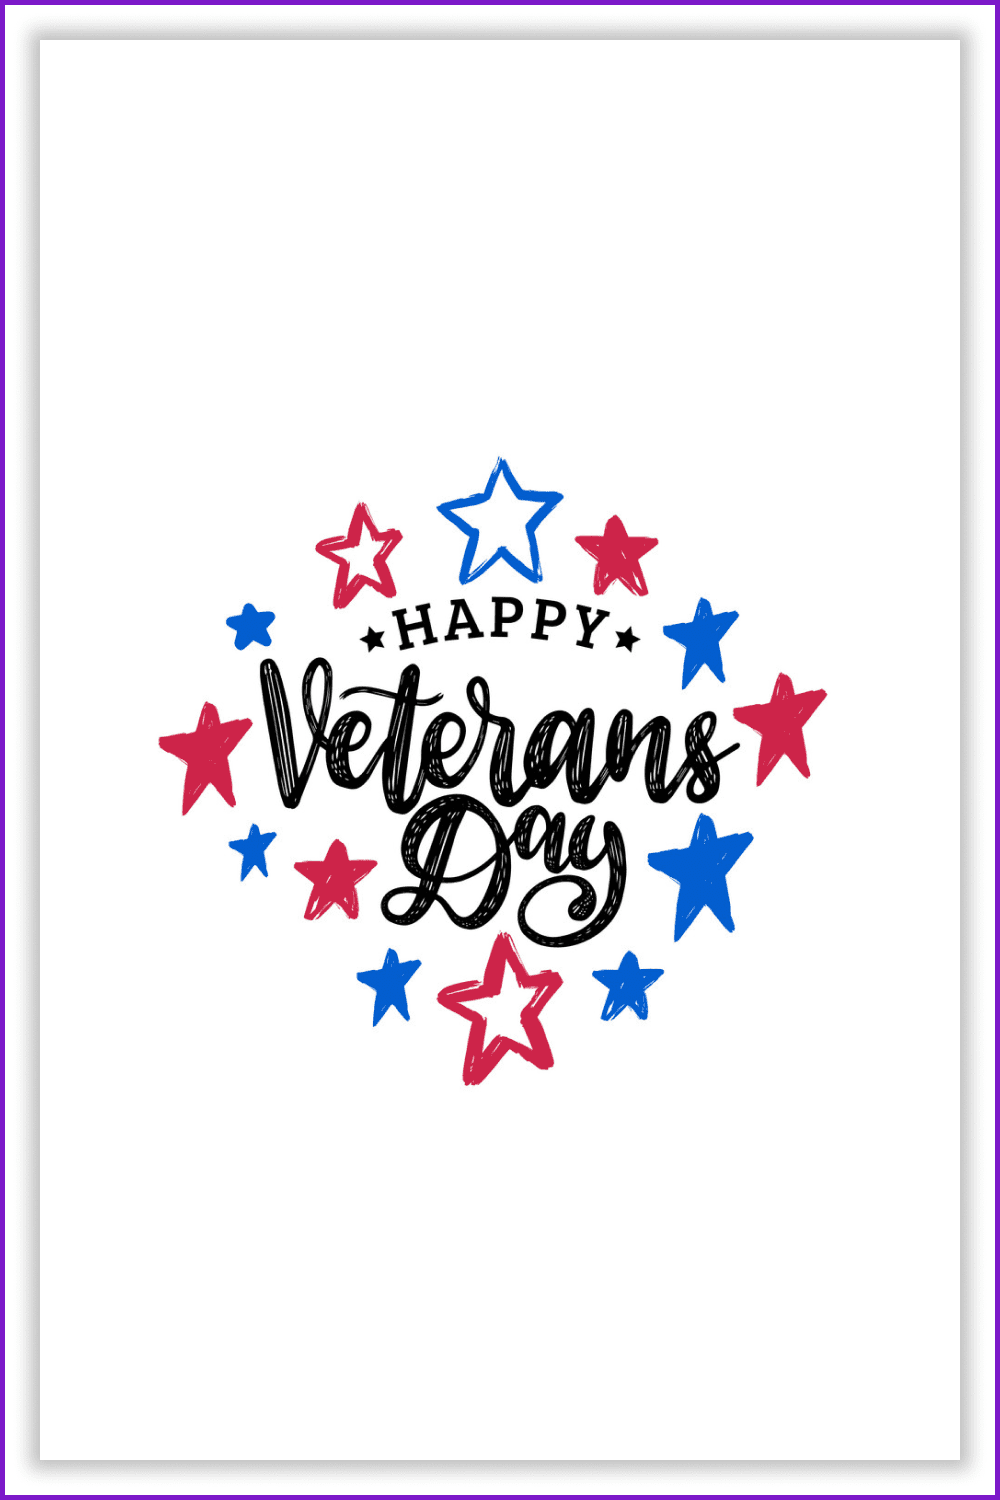 Happy Veterans Day Hand Lettering surrounded by red and blue stars.